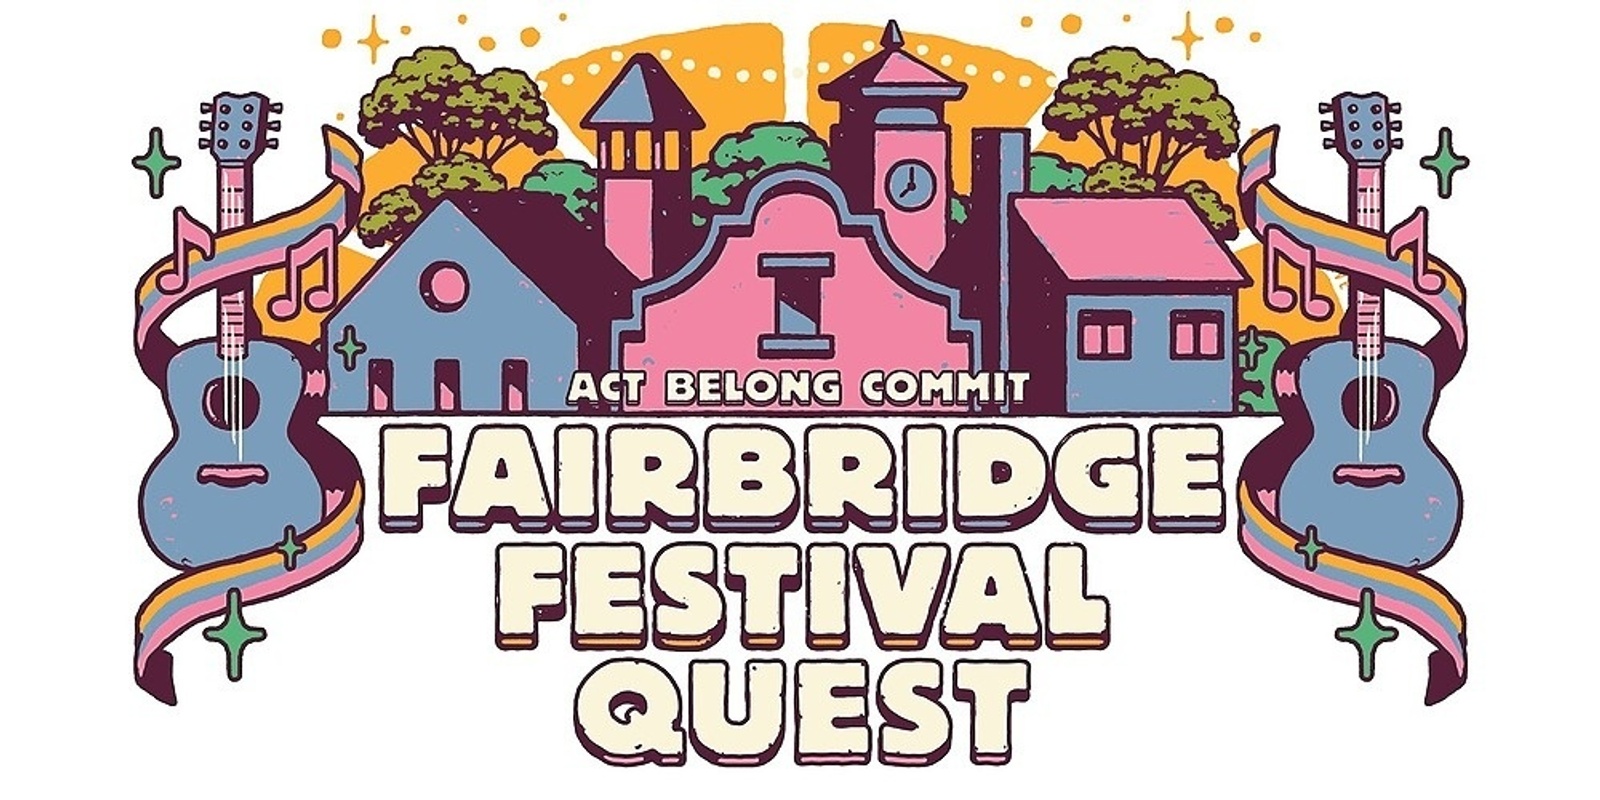 Banner image for Mandurah youth songwriting workshop series presented by 2021 Act Belong Commit Fairbridge Festival Quest